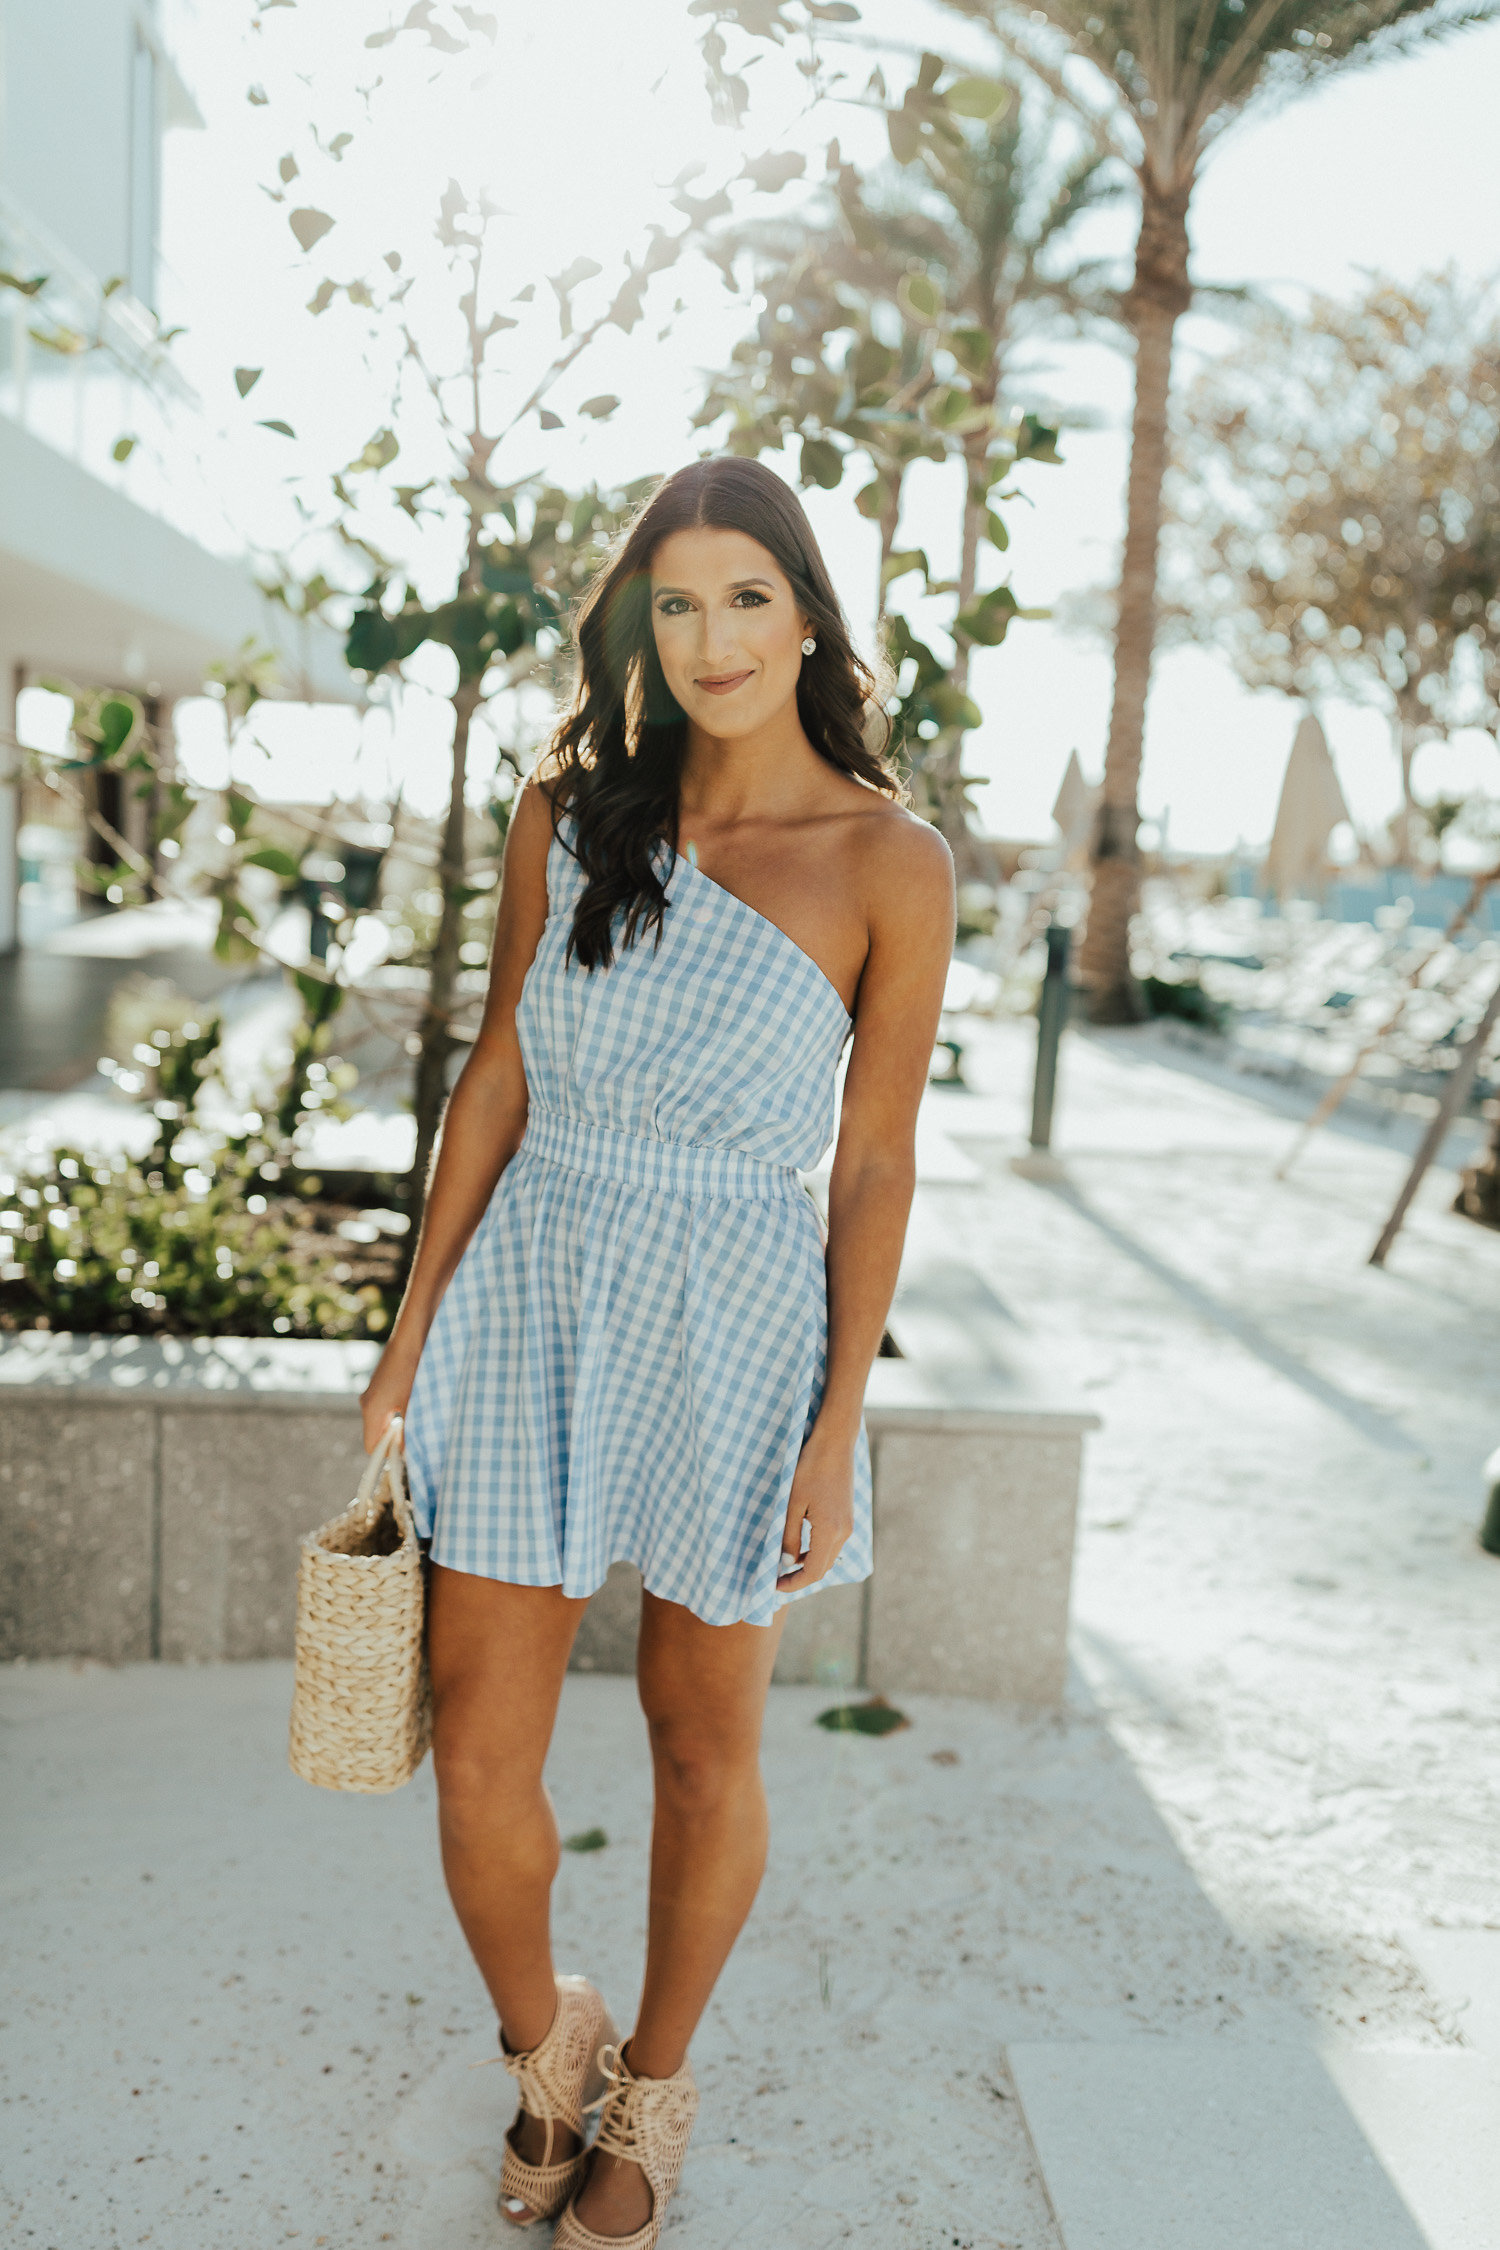 gingham one shoulder dress, gingham check dress, gingham dress, gingham dresses, vacation dresses, vacation style, vacation fashion, vacation outfit, straw beach tote, straw tote, hat attack tote, jeffrey campbell sandals, zota beach resort // grace wainwright a southern drawl